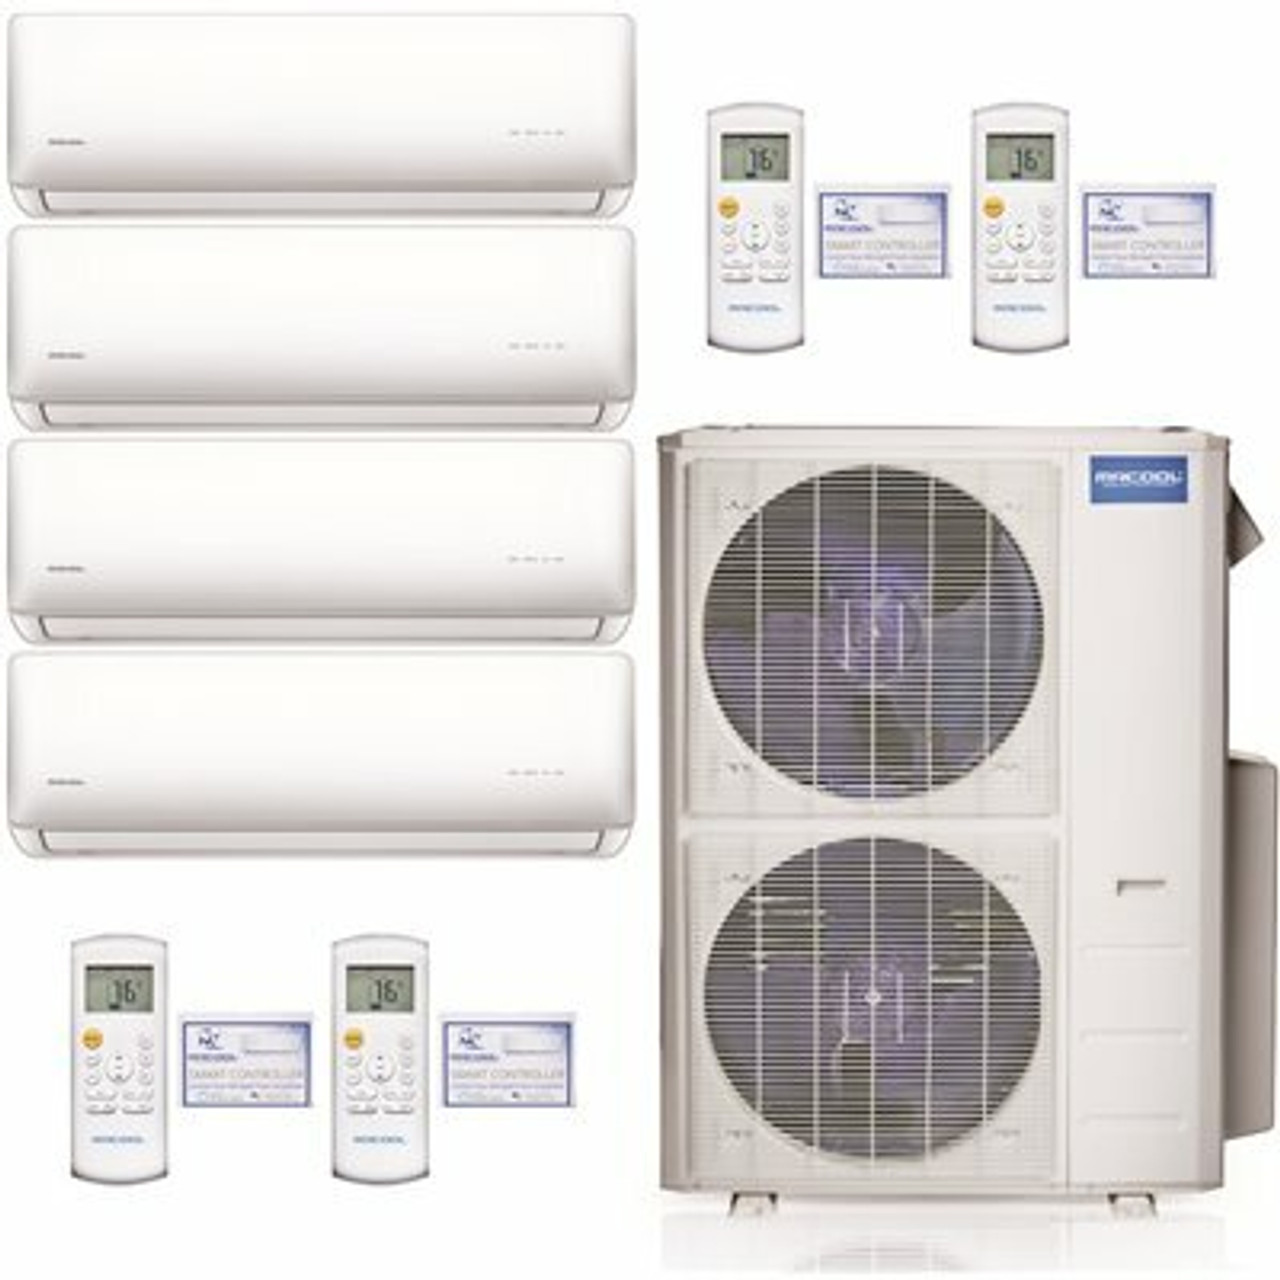 Mrcool Olympus 45,000 Btu 3.75 Ton 4-Zone Ductless Mini-Split Air Conditioner And Heat Pump, 25 Ft. Install Kit - 230V/60Hz